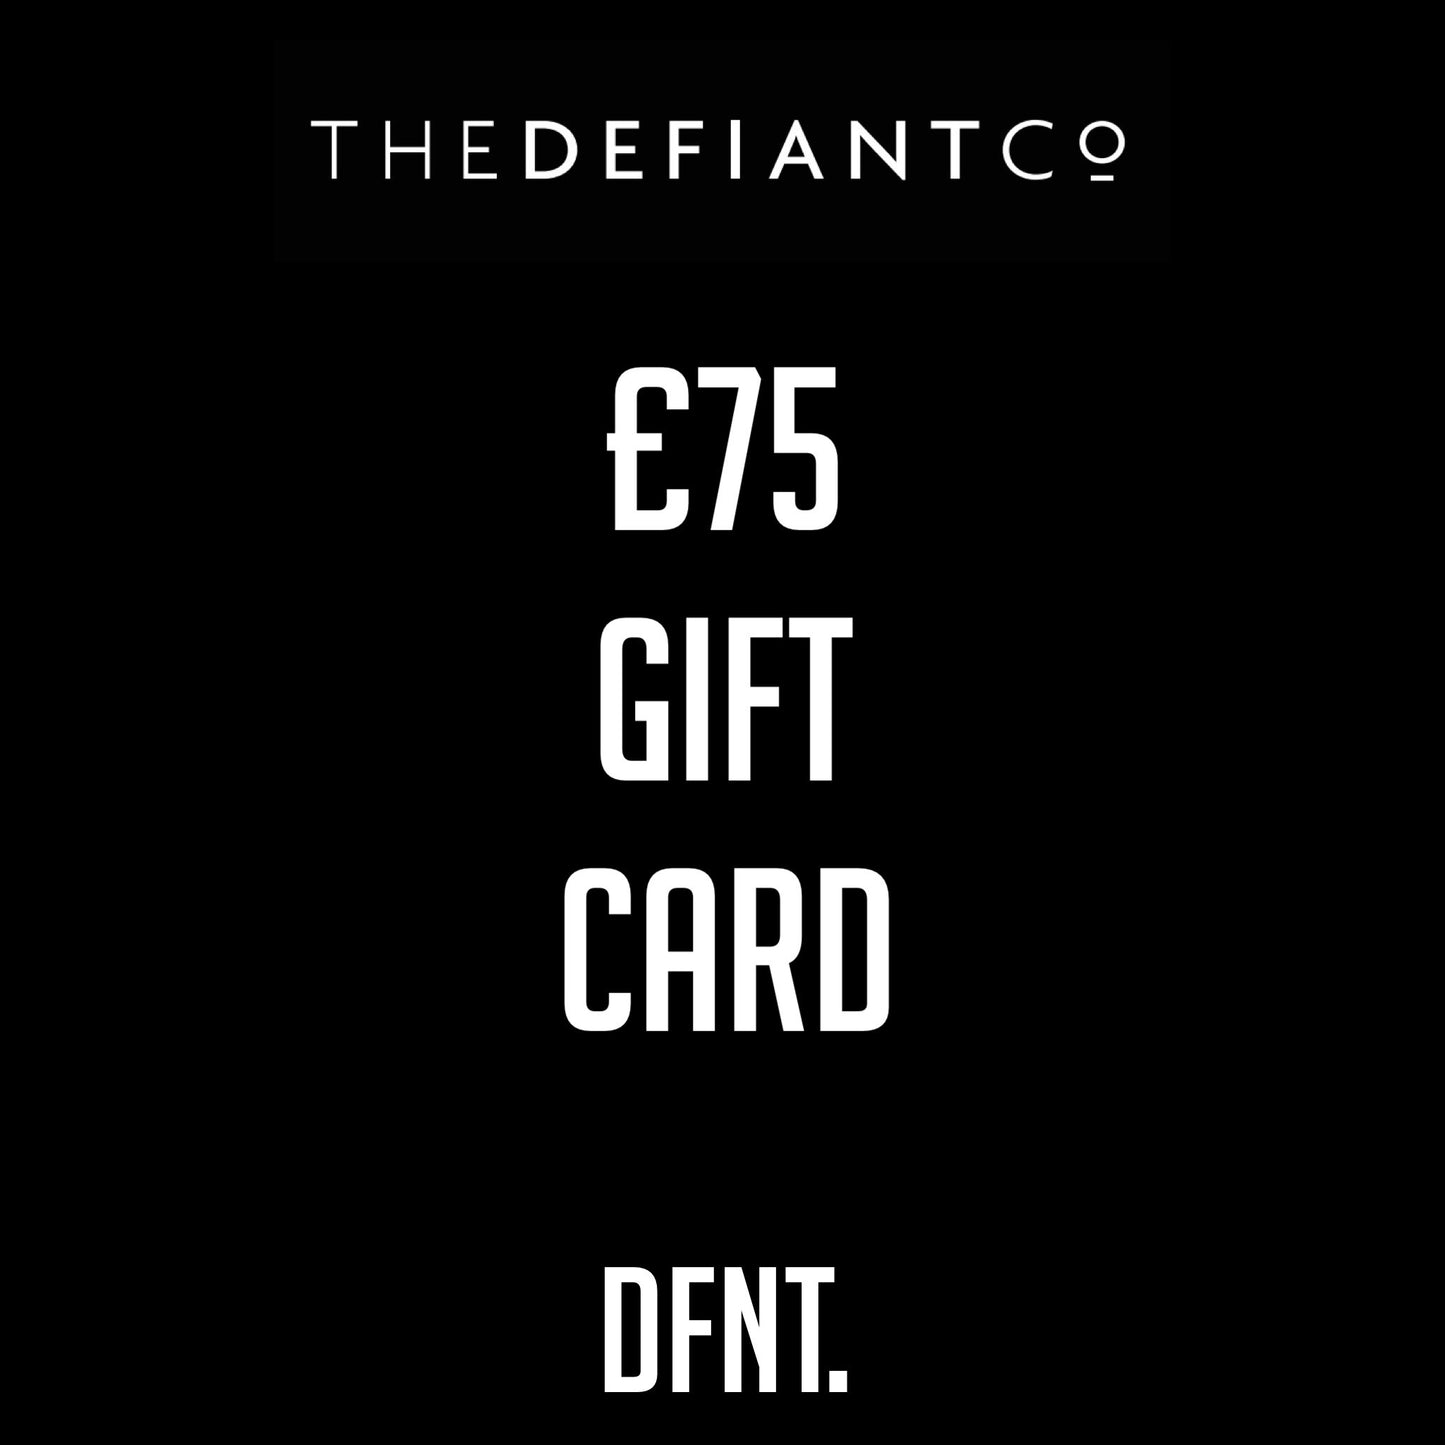 A photo of The Defiant co Gift Card.  The gift card shows both The Defiant Co and DFNT. logos at the top and bottom respectively. Gifts cards are a great gift idea for your friends and family. The centre displays the value of the Gift Card which is £75.